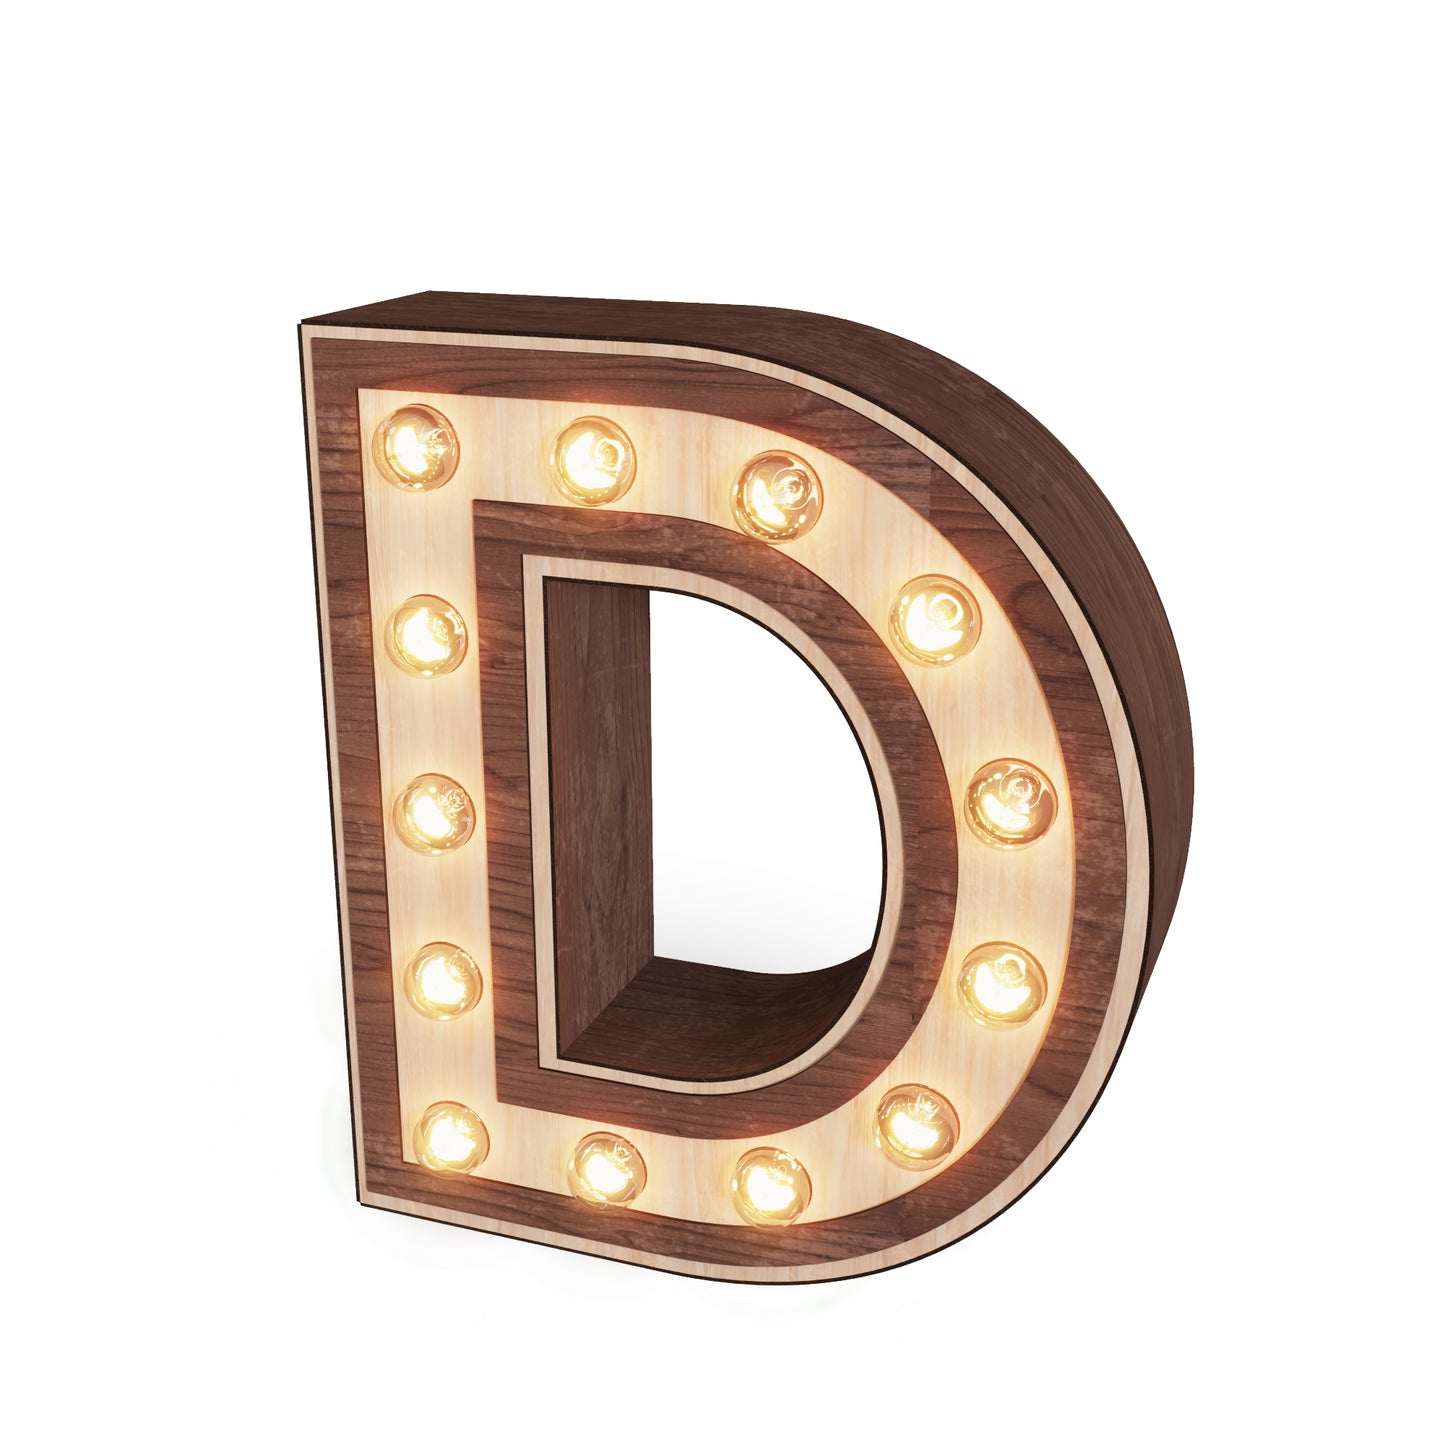 Light-up Marquee Letter Display "D"